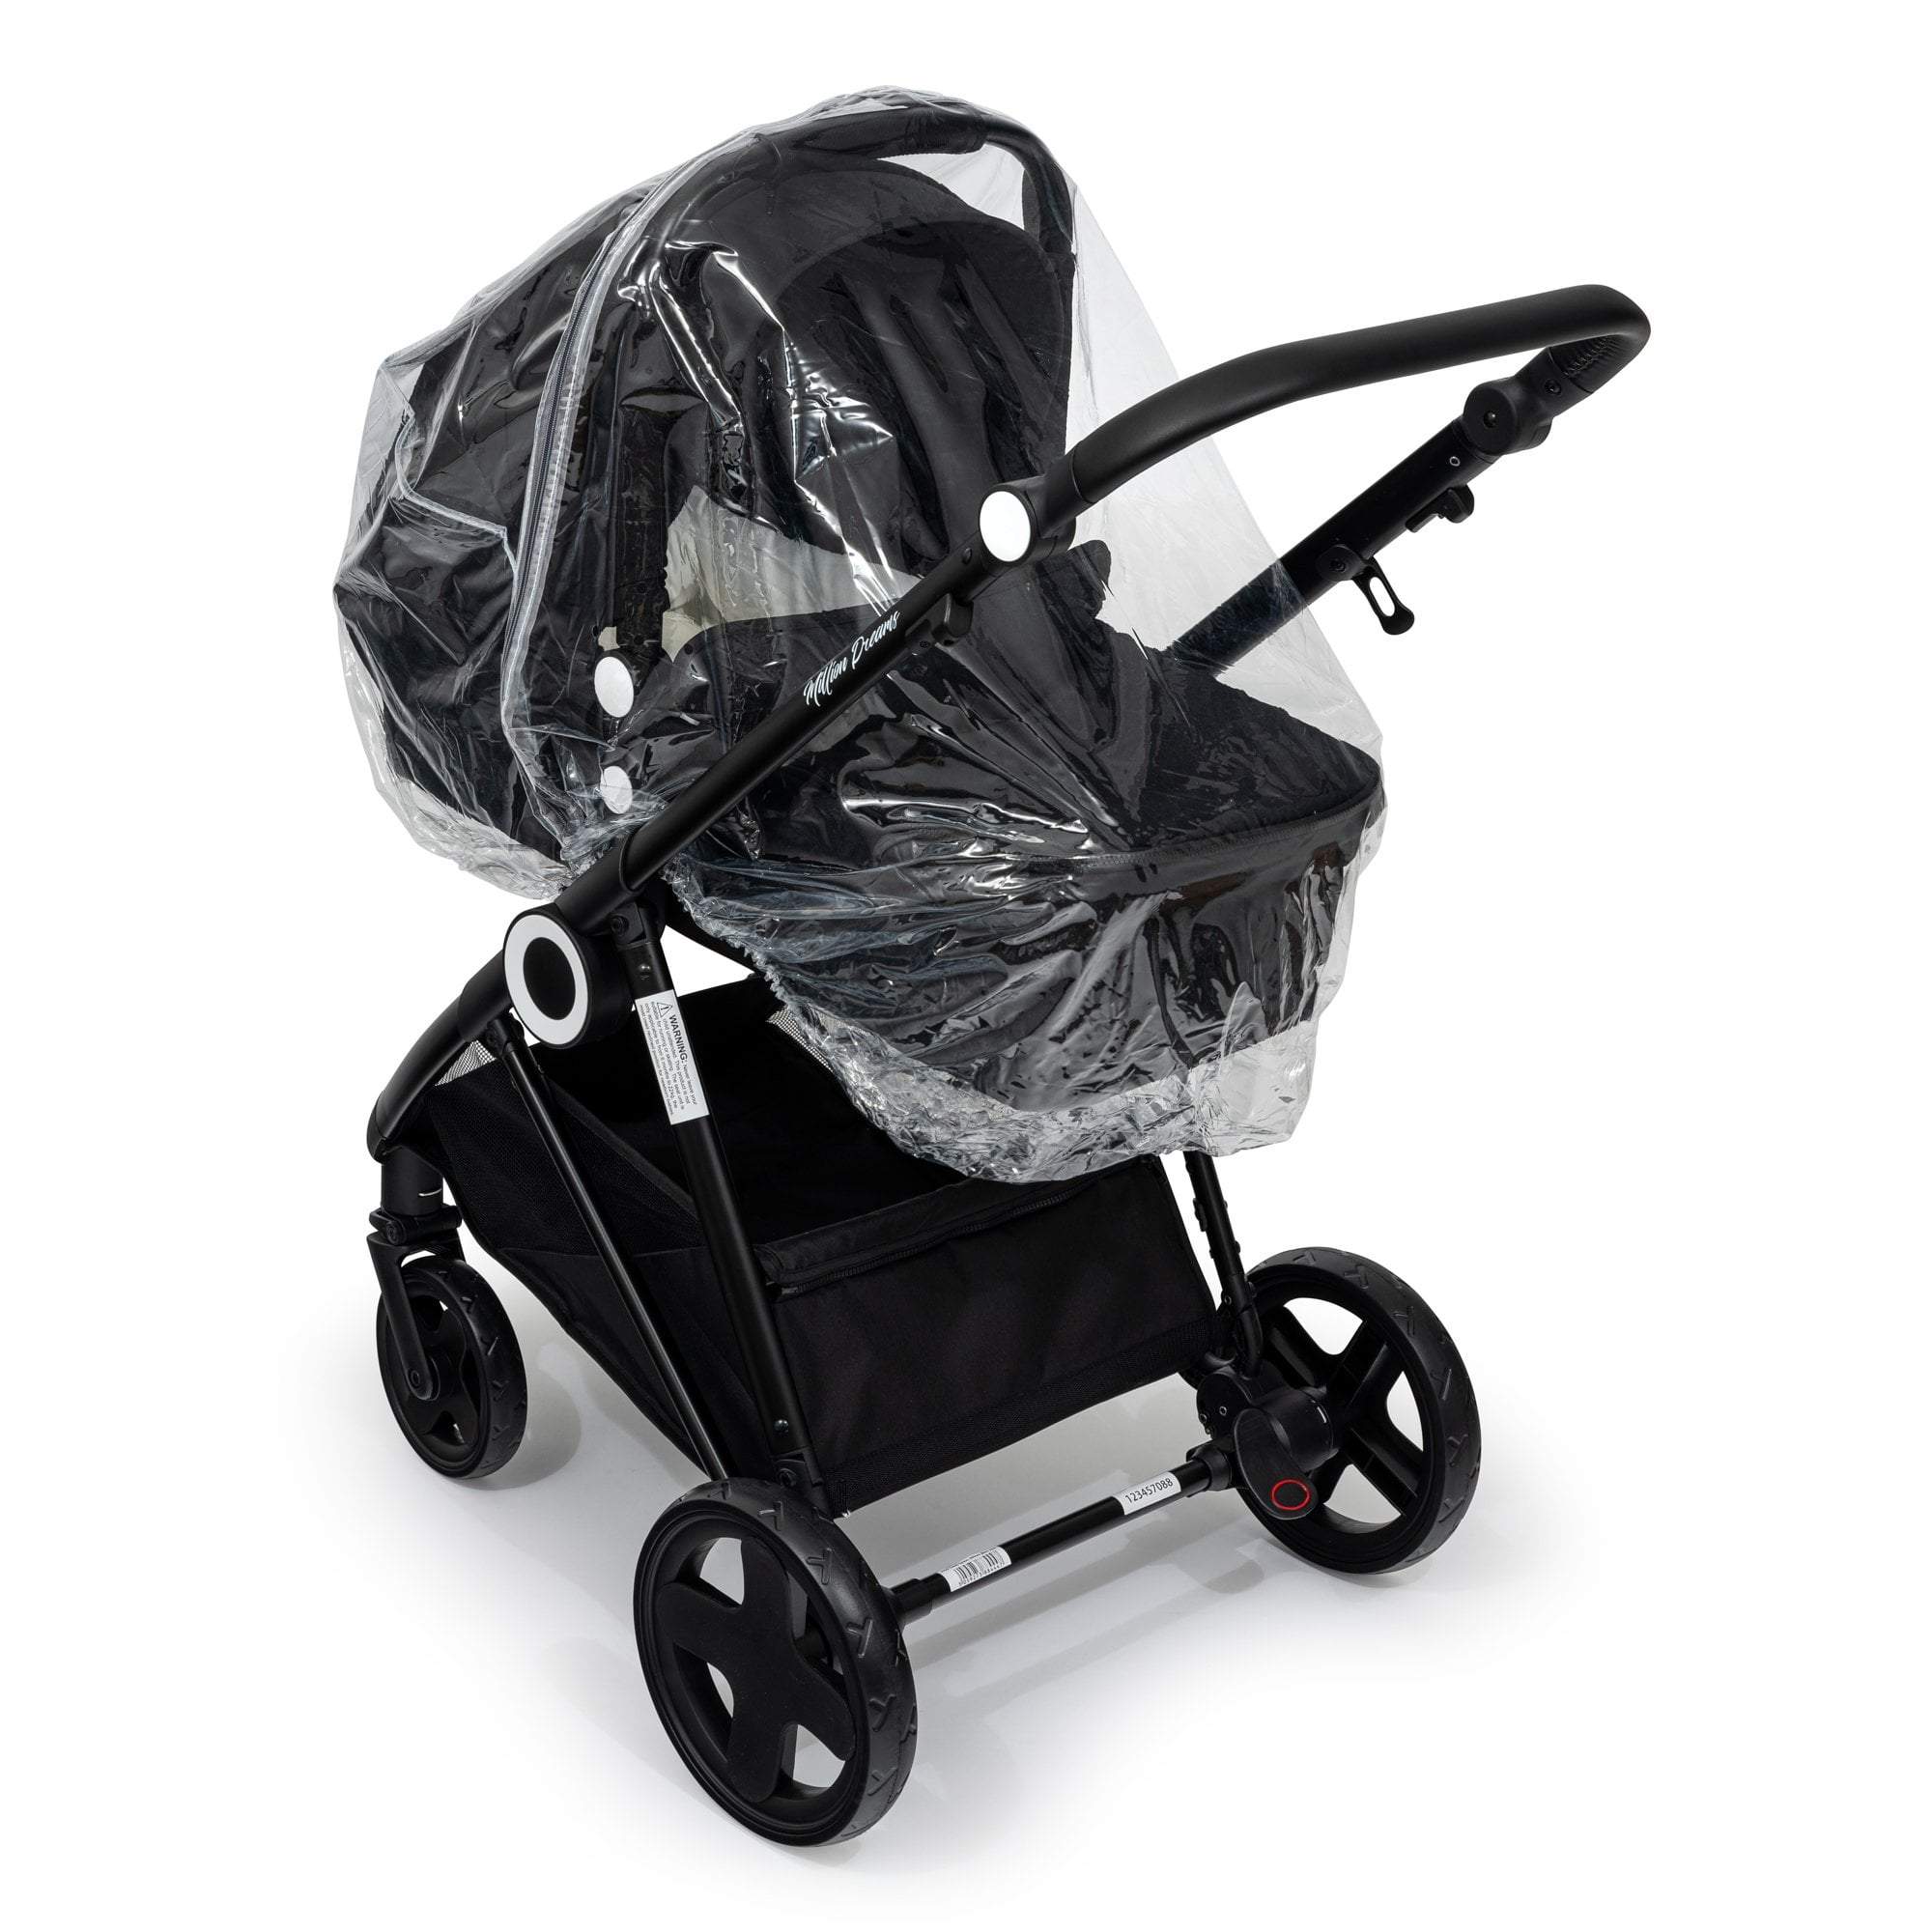 Carrycot Raincover Compatible With Concord - Fits All Models - For Your Little One